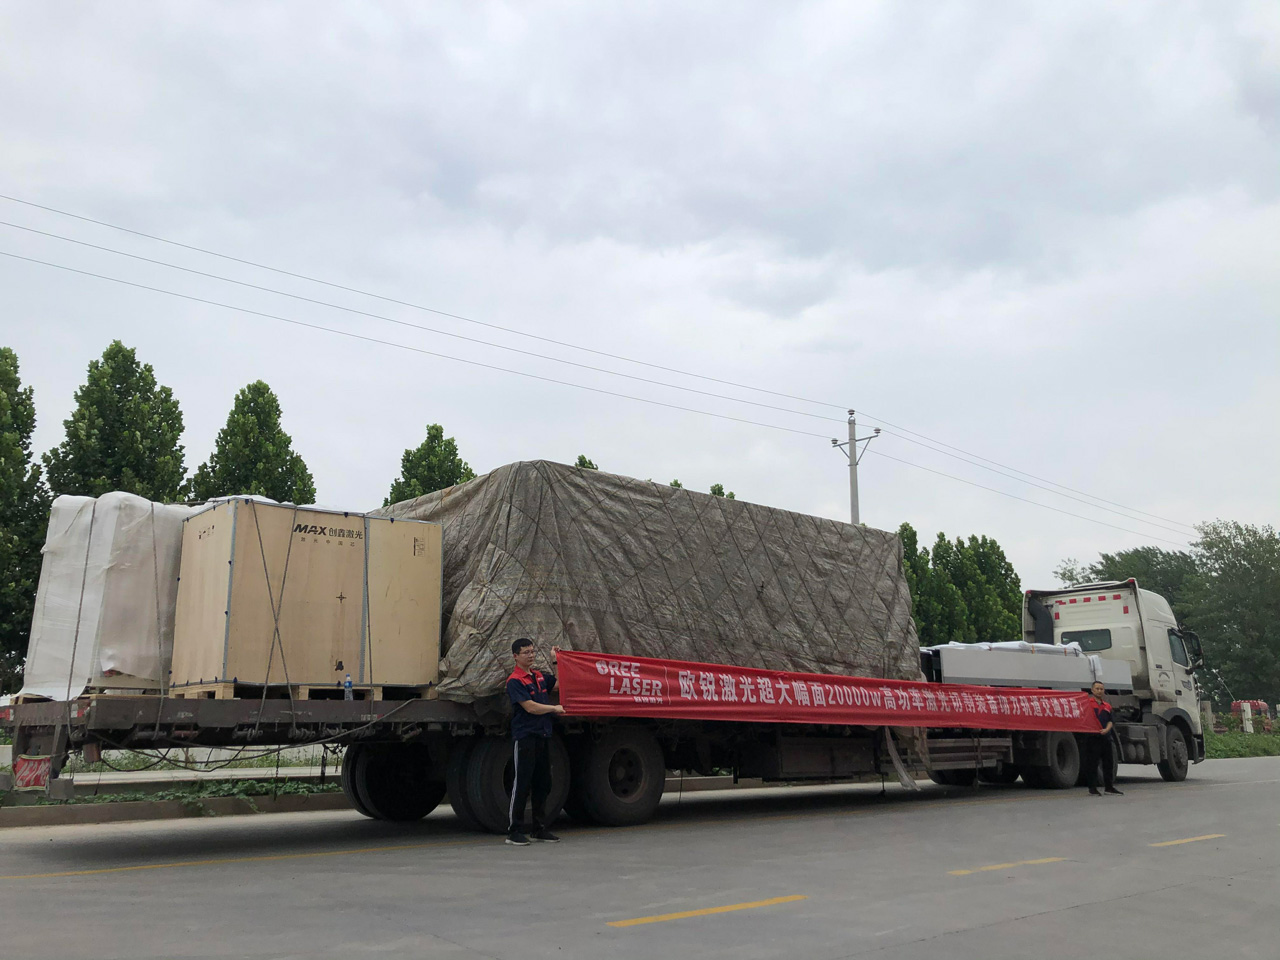 The 20000w High Power Fiber Laser Cutting Equipment OR-PH from Oree Laser Has Been Delivered Successfully!(图2)